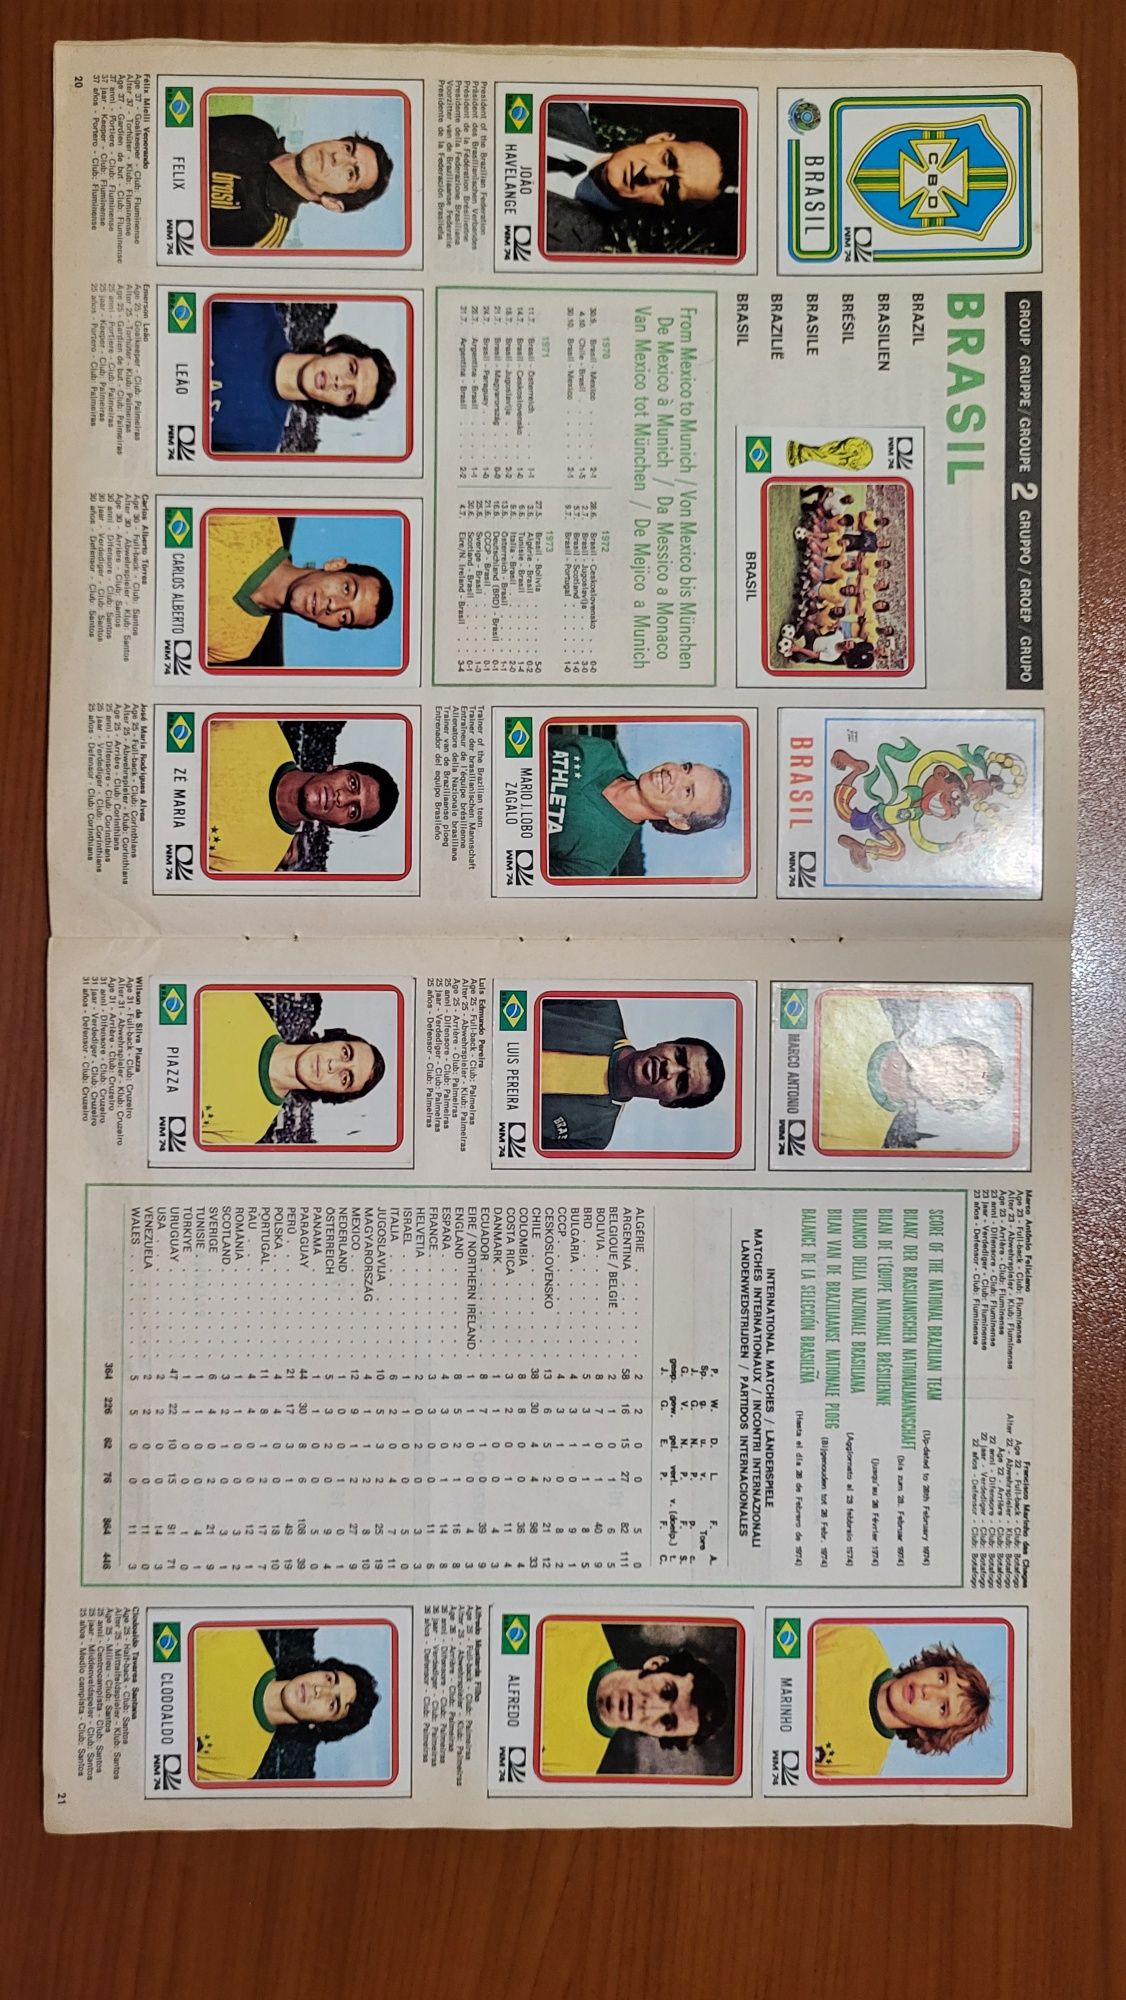 Munchen 74 Panini complet